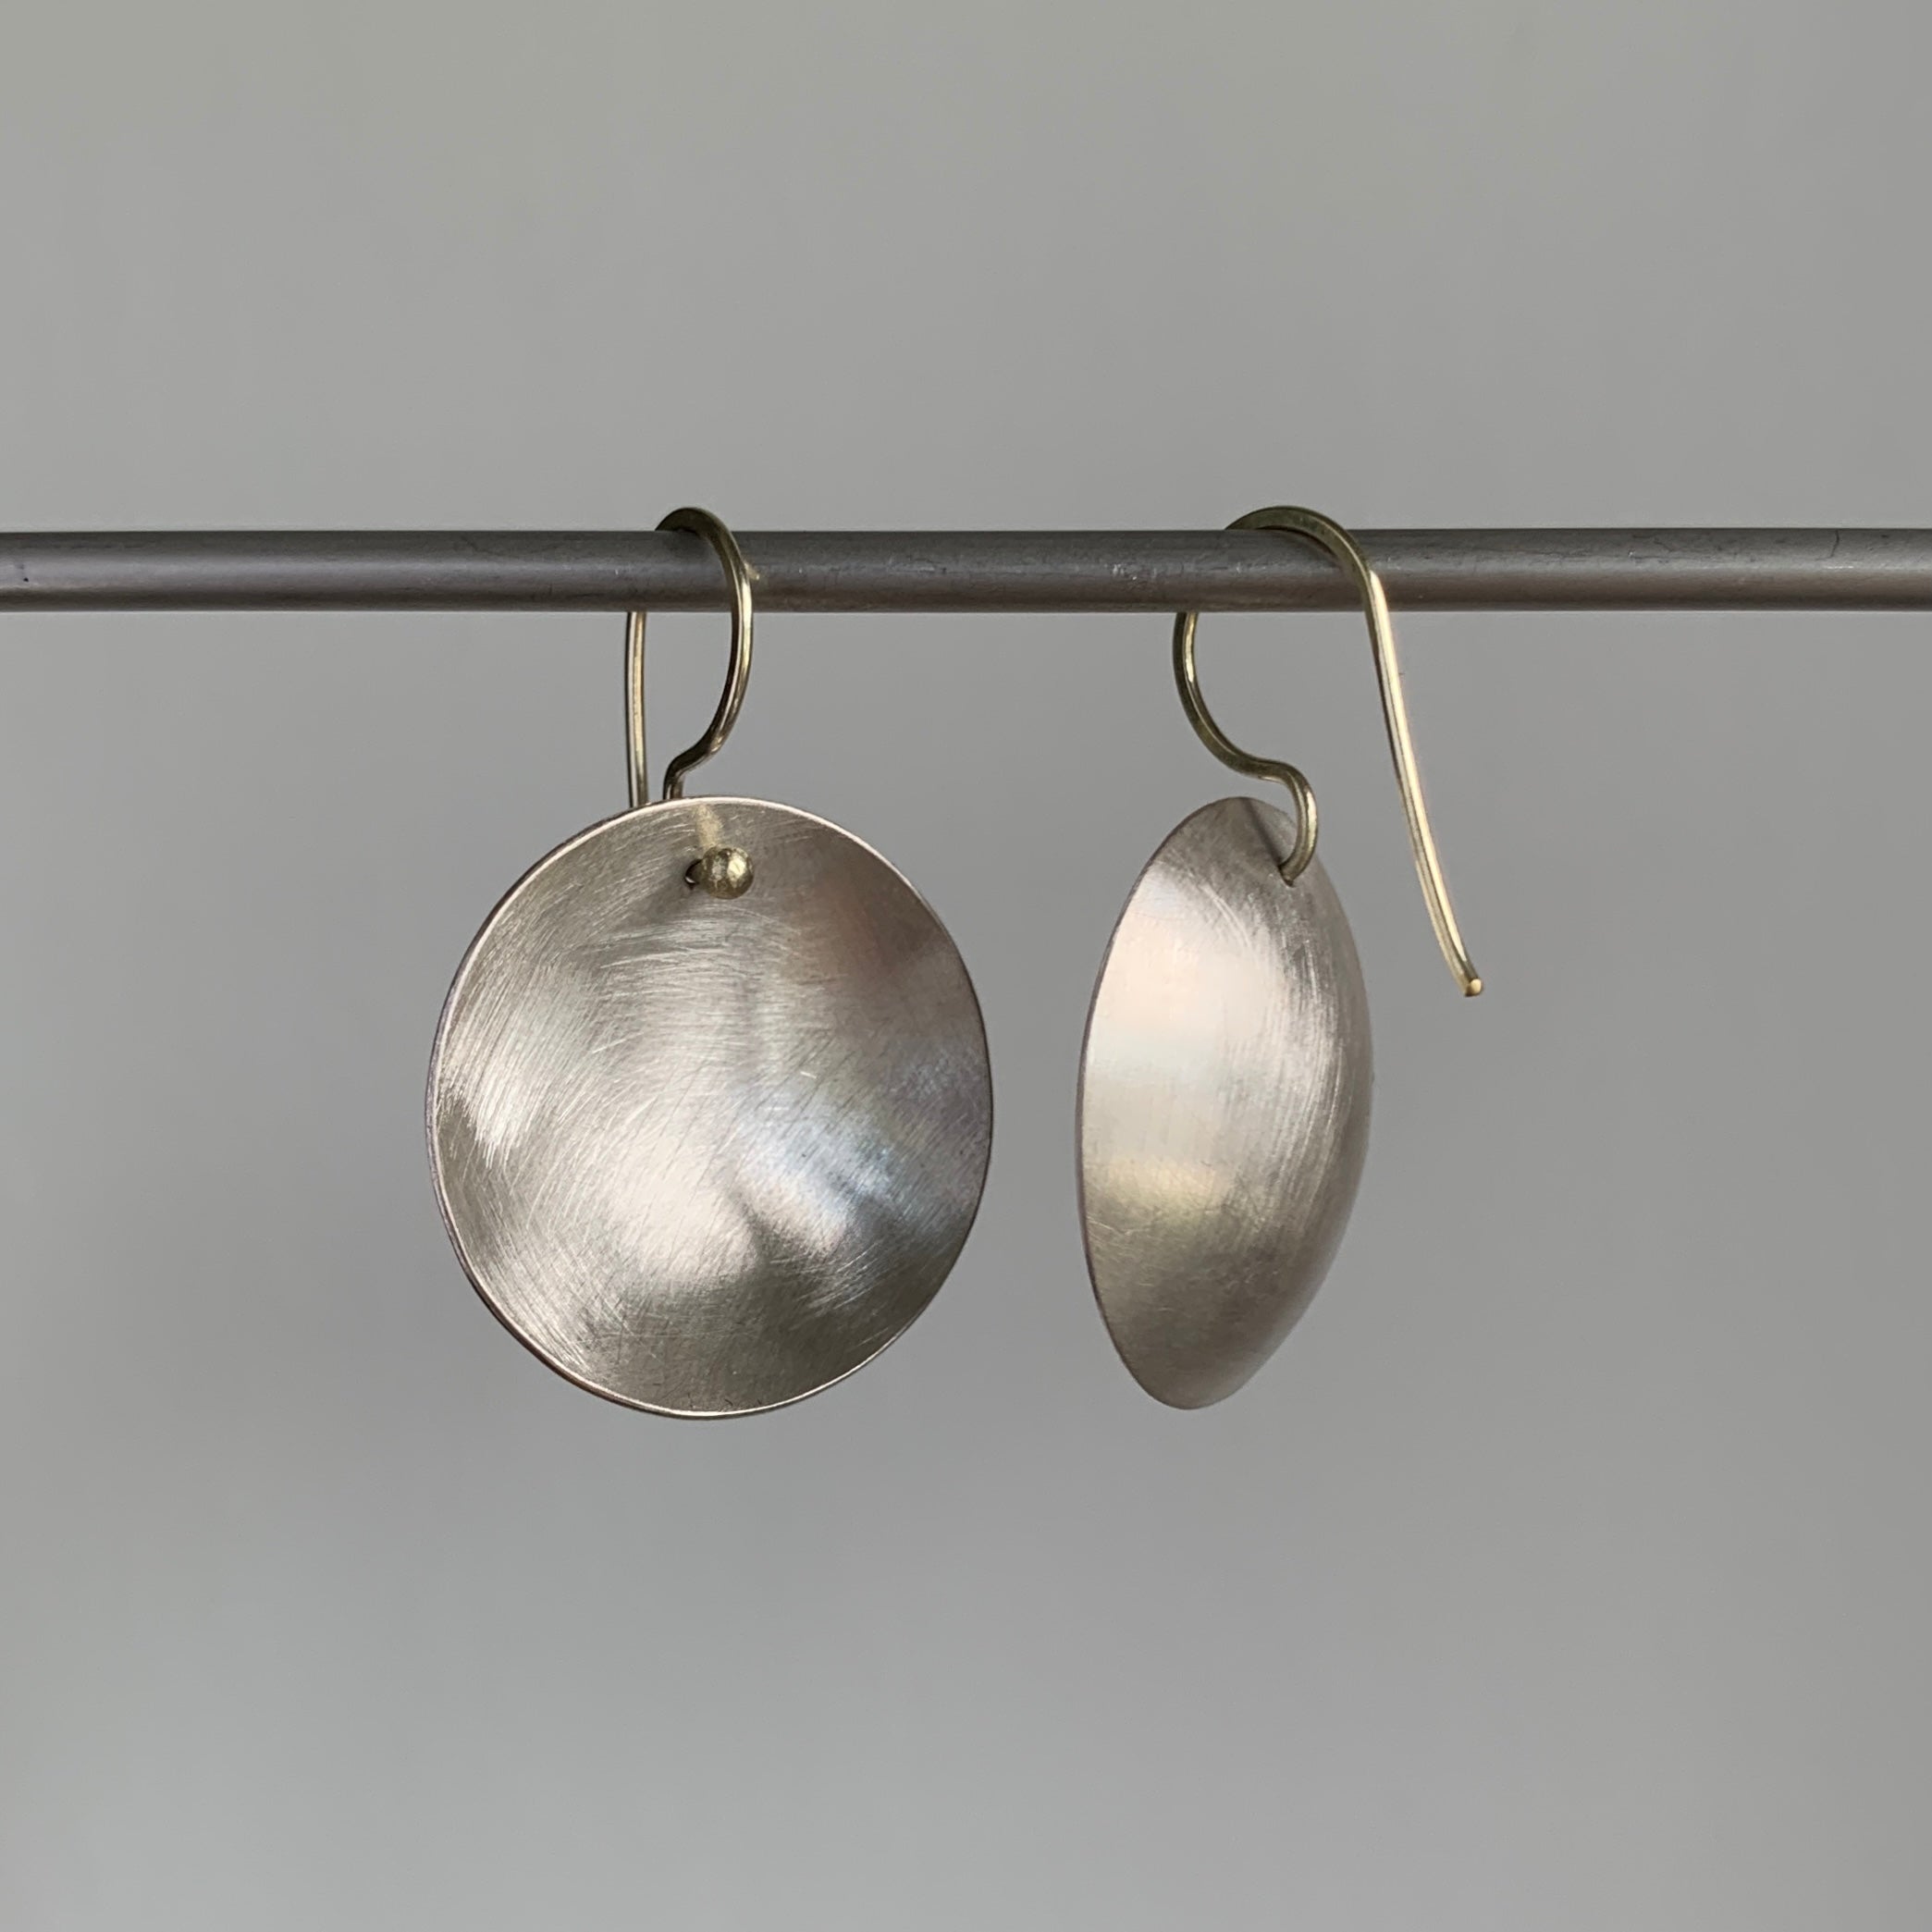 Heather Guidero Small Silver Dome Earrings